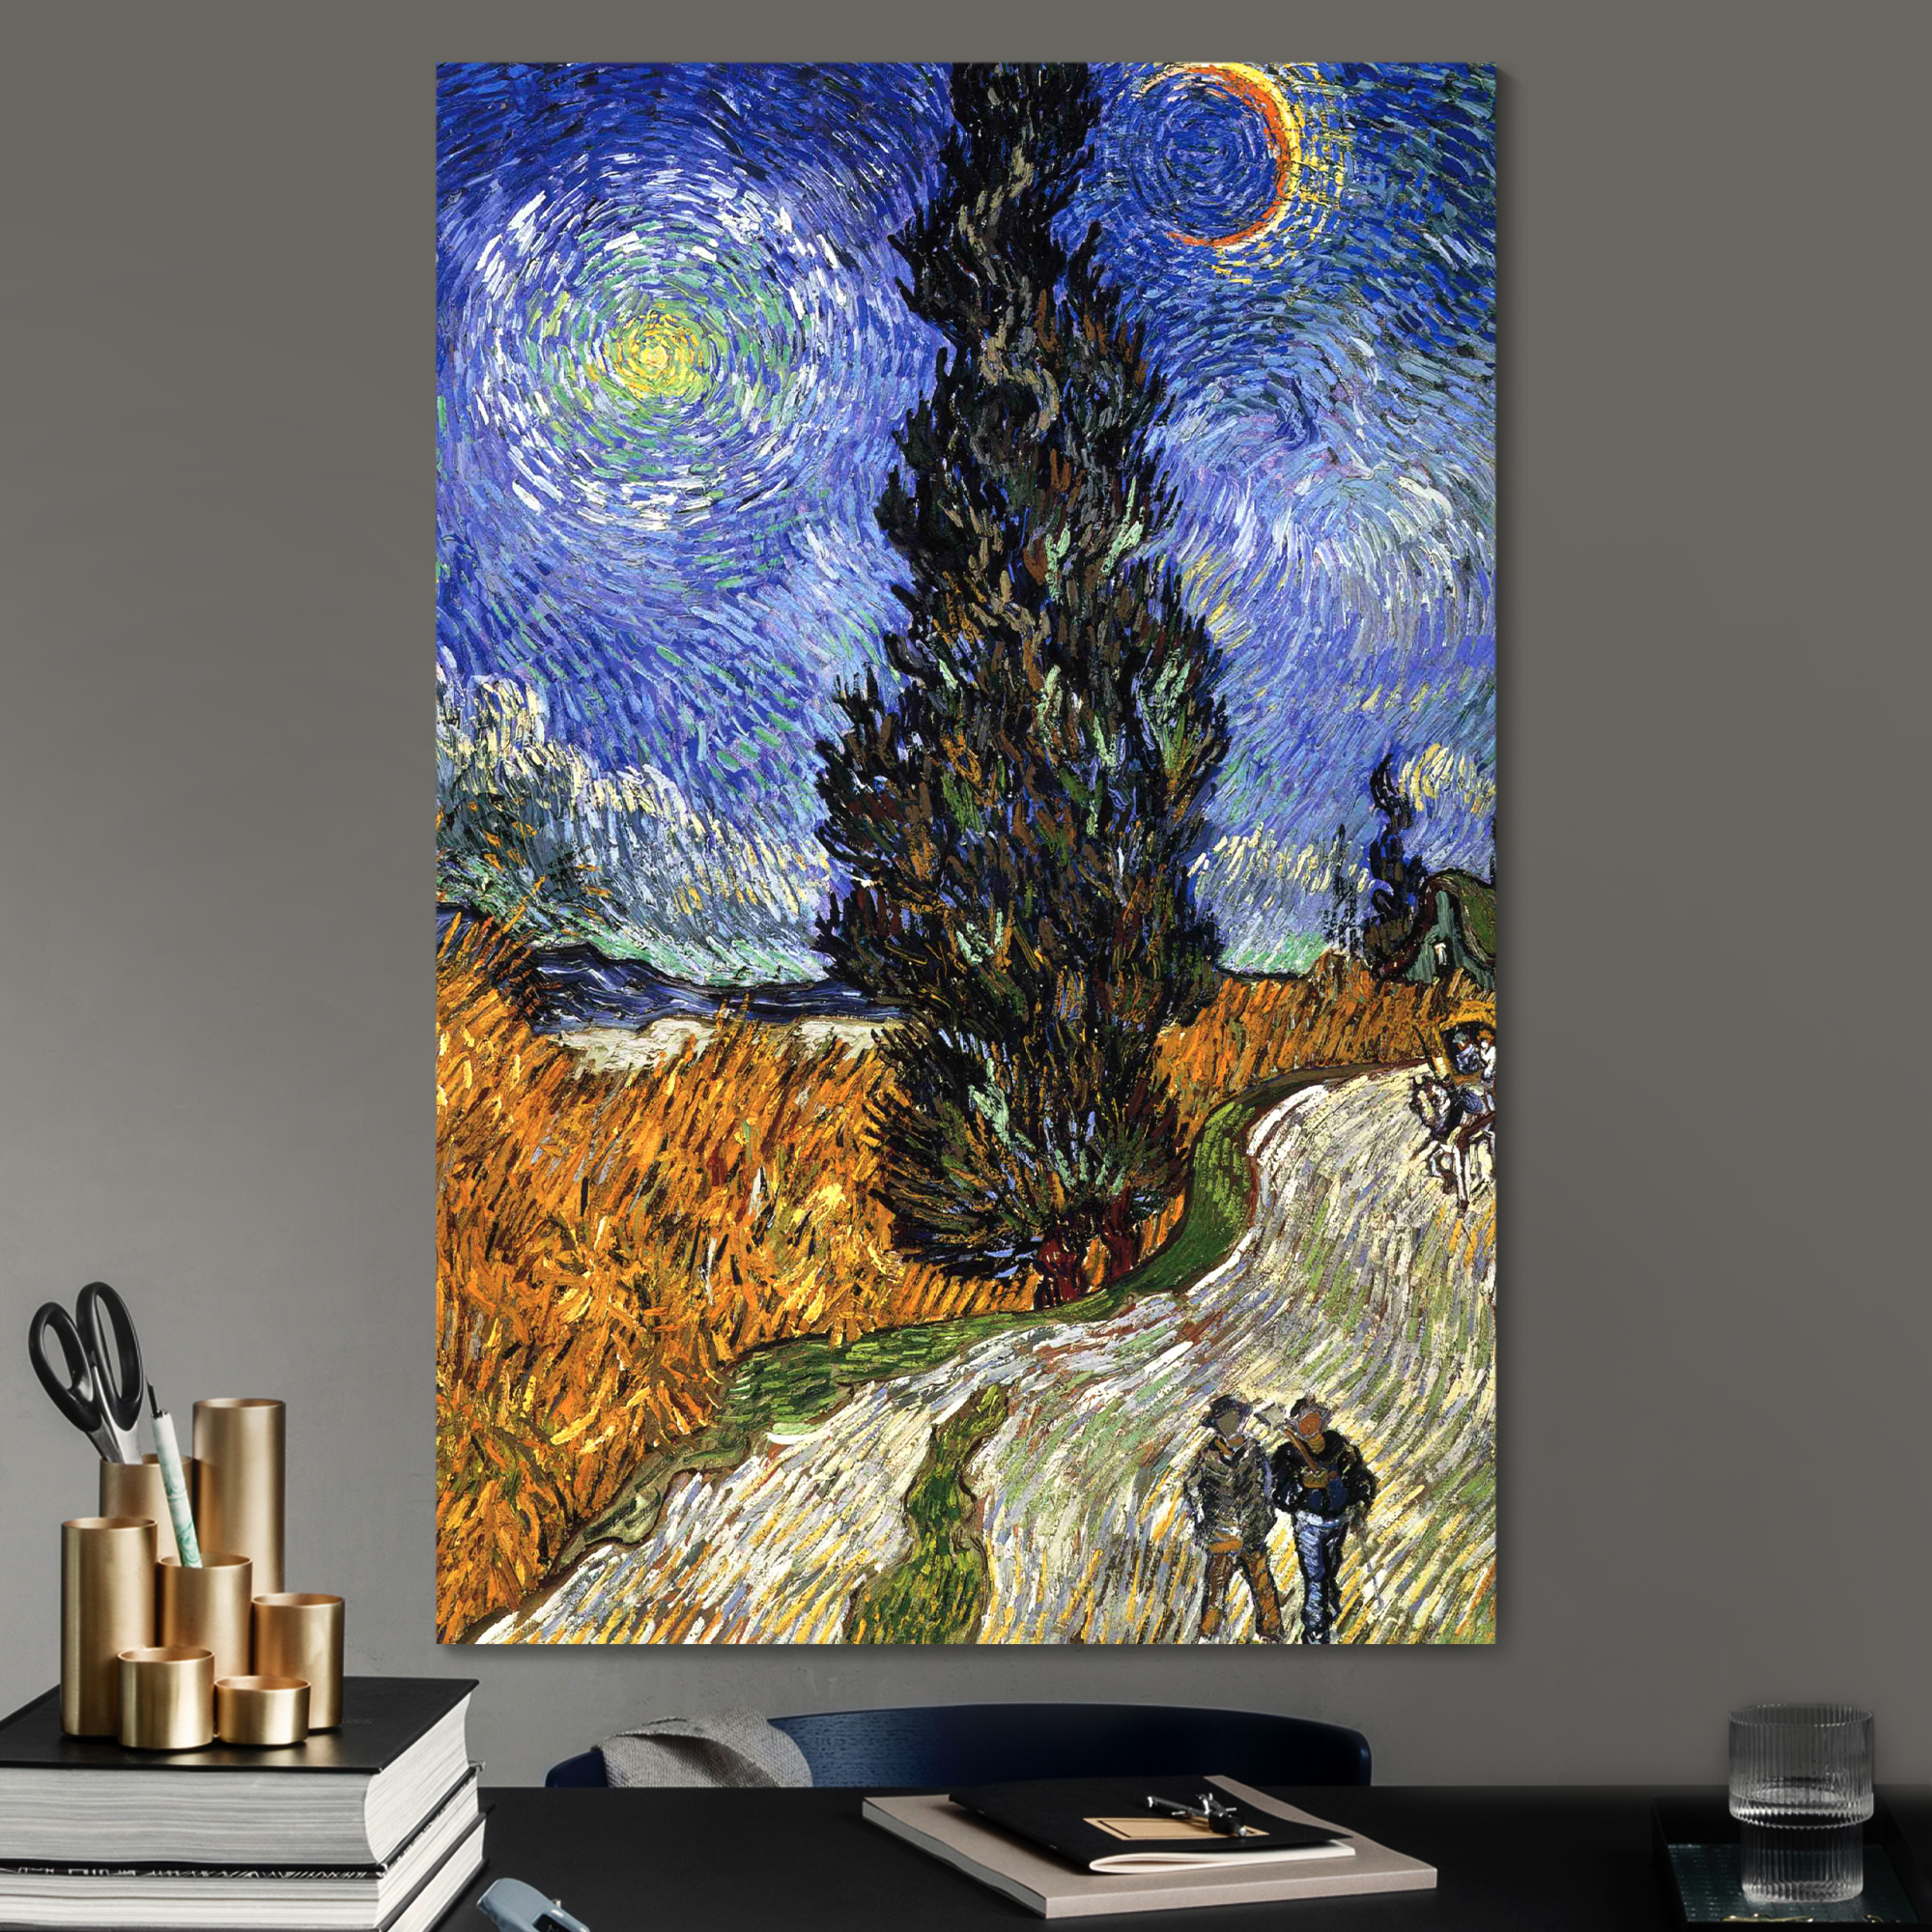 Road with Cypress and Star by Vincent Van Gogh Giclee Canvas Prints Wrapped Gallery Wall Art | Stretched and Framed Ready to Hang - 24